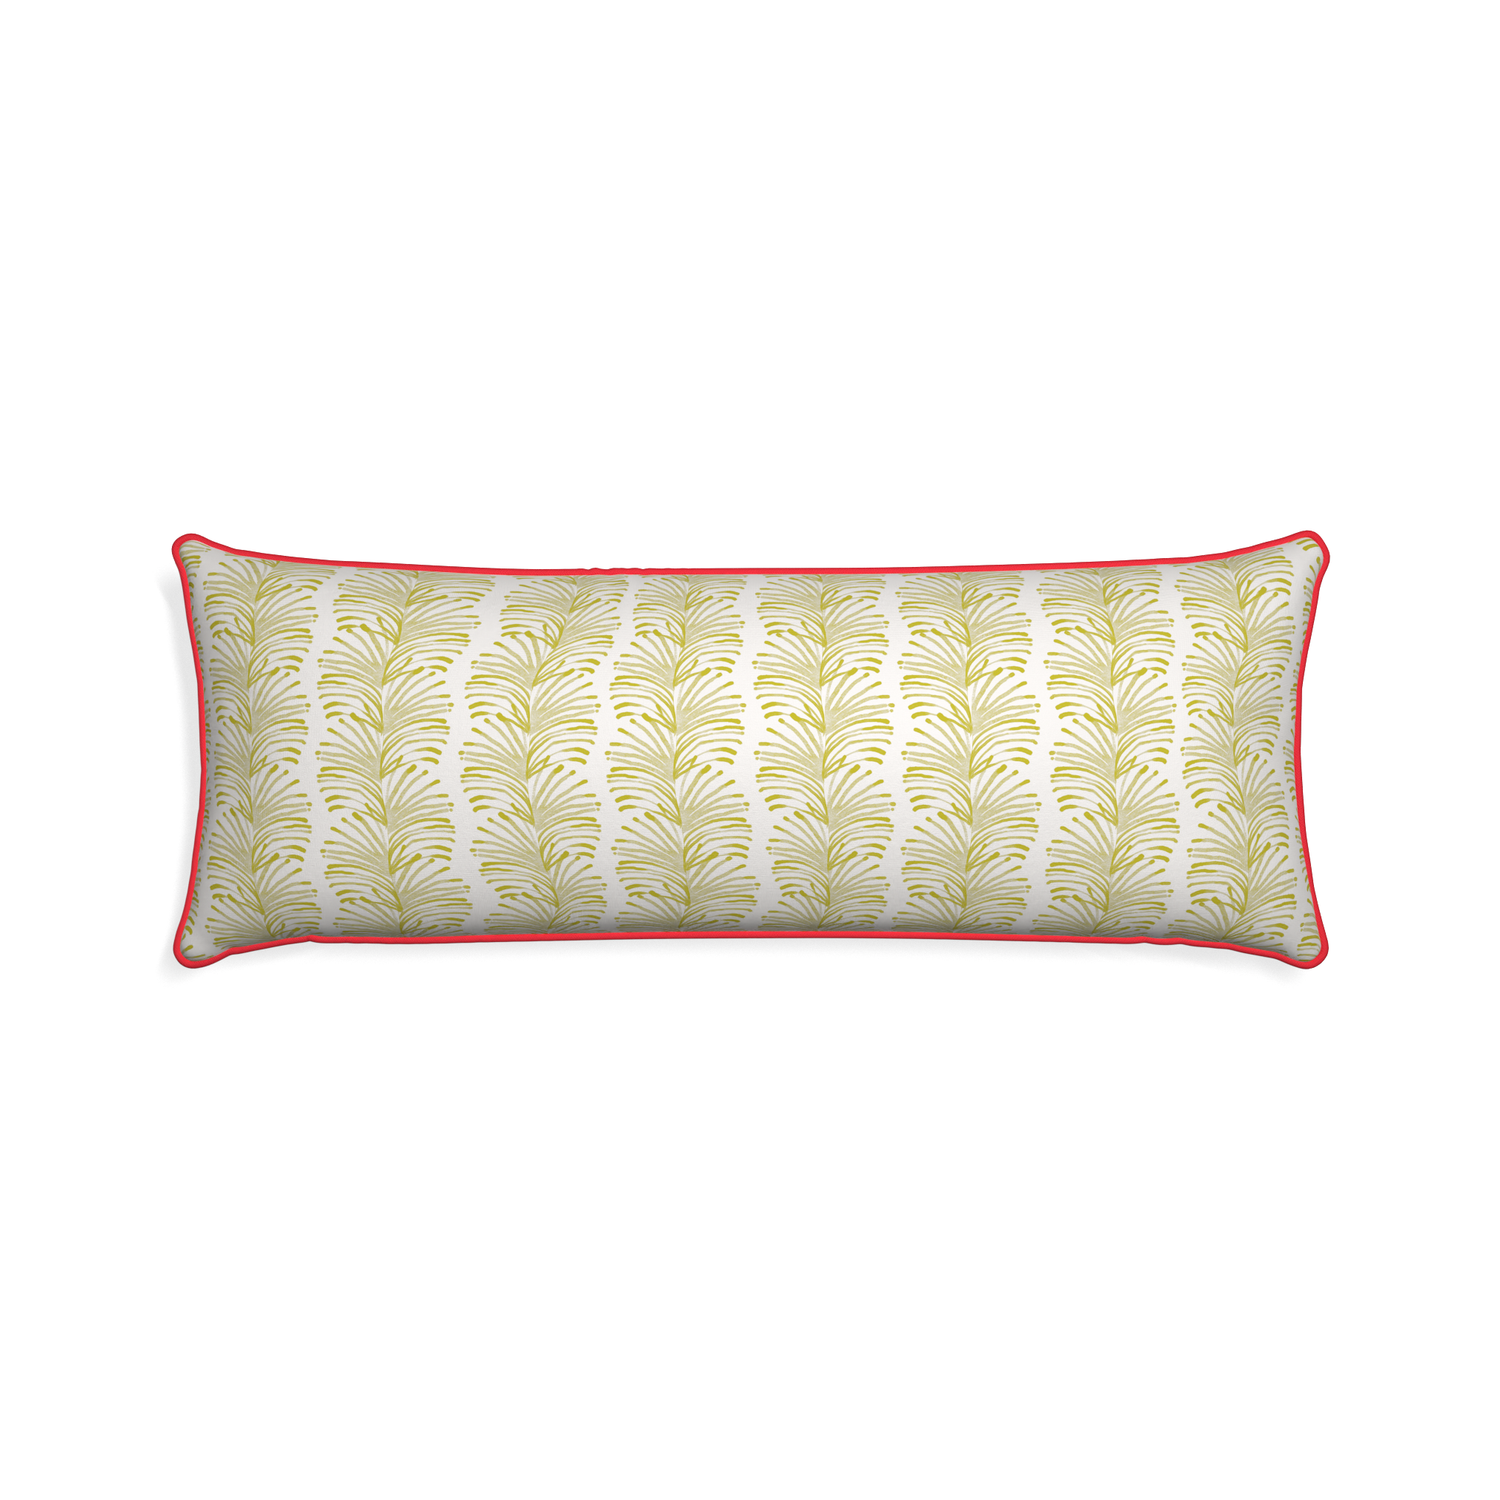 Xl-lumbar emma chartreuse custom pillow with cherry piping on white background